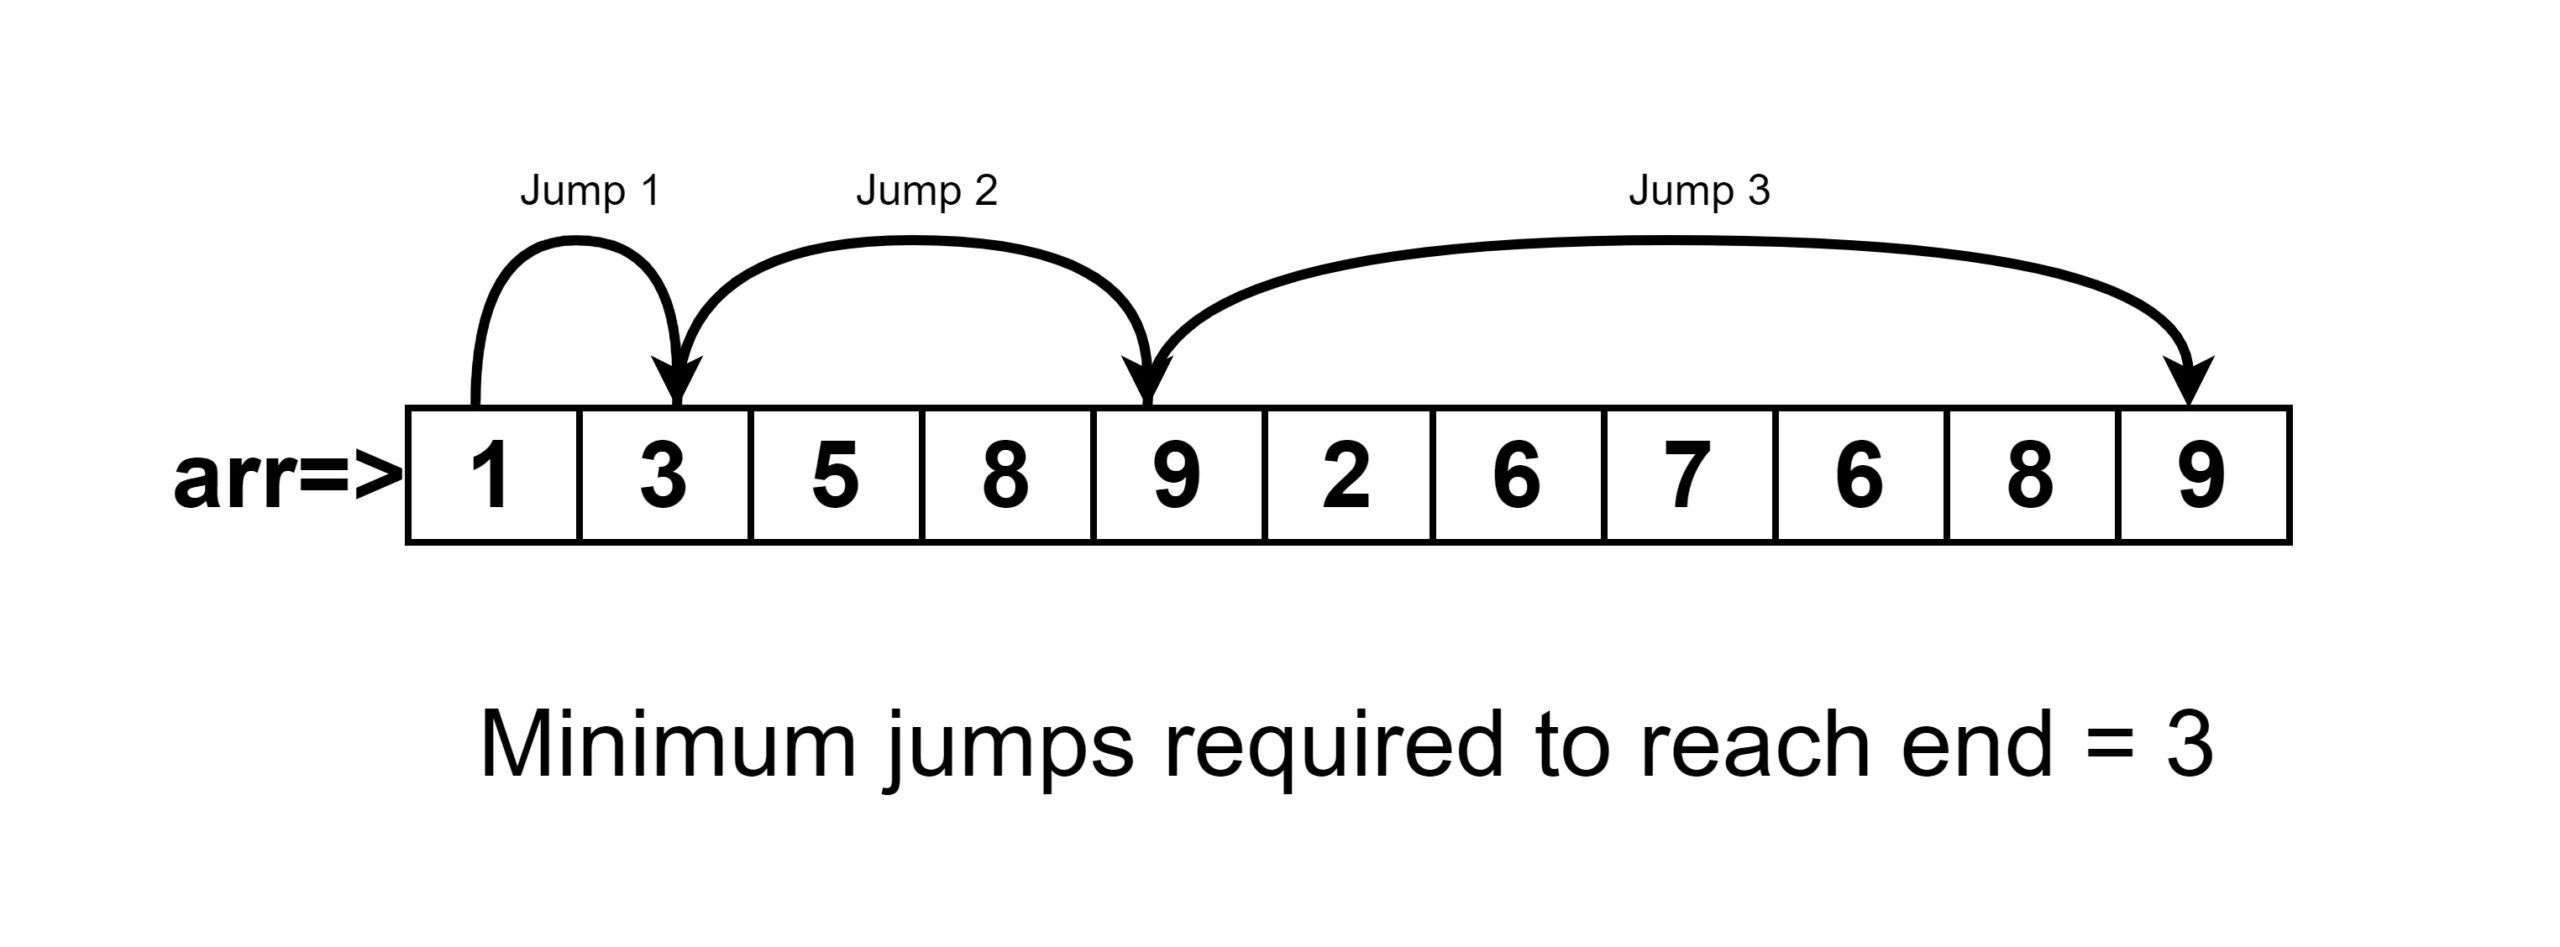 Minimum number of jumps to reach end